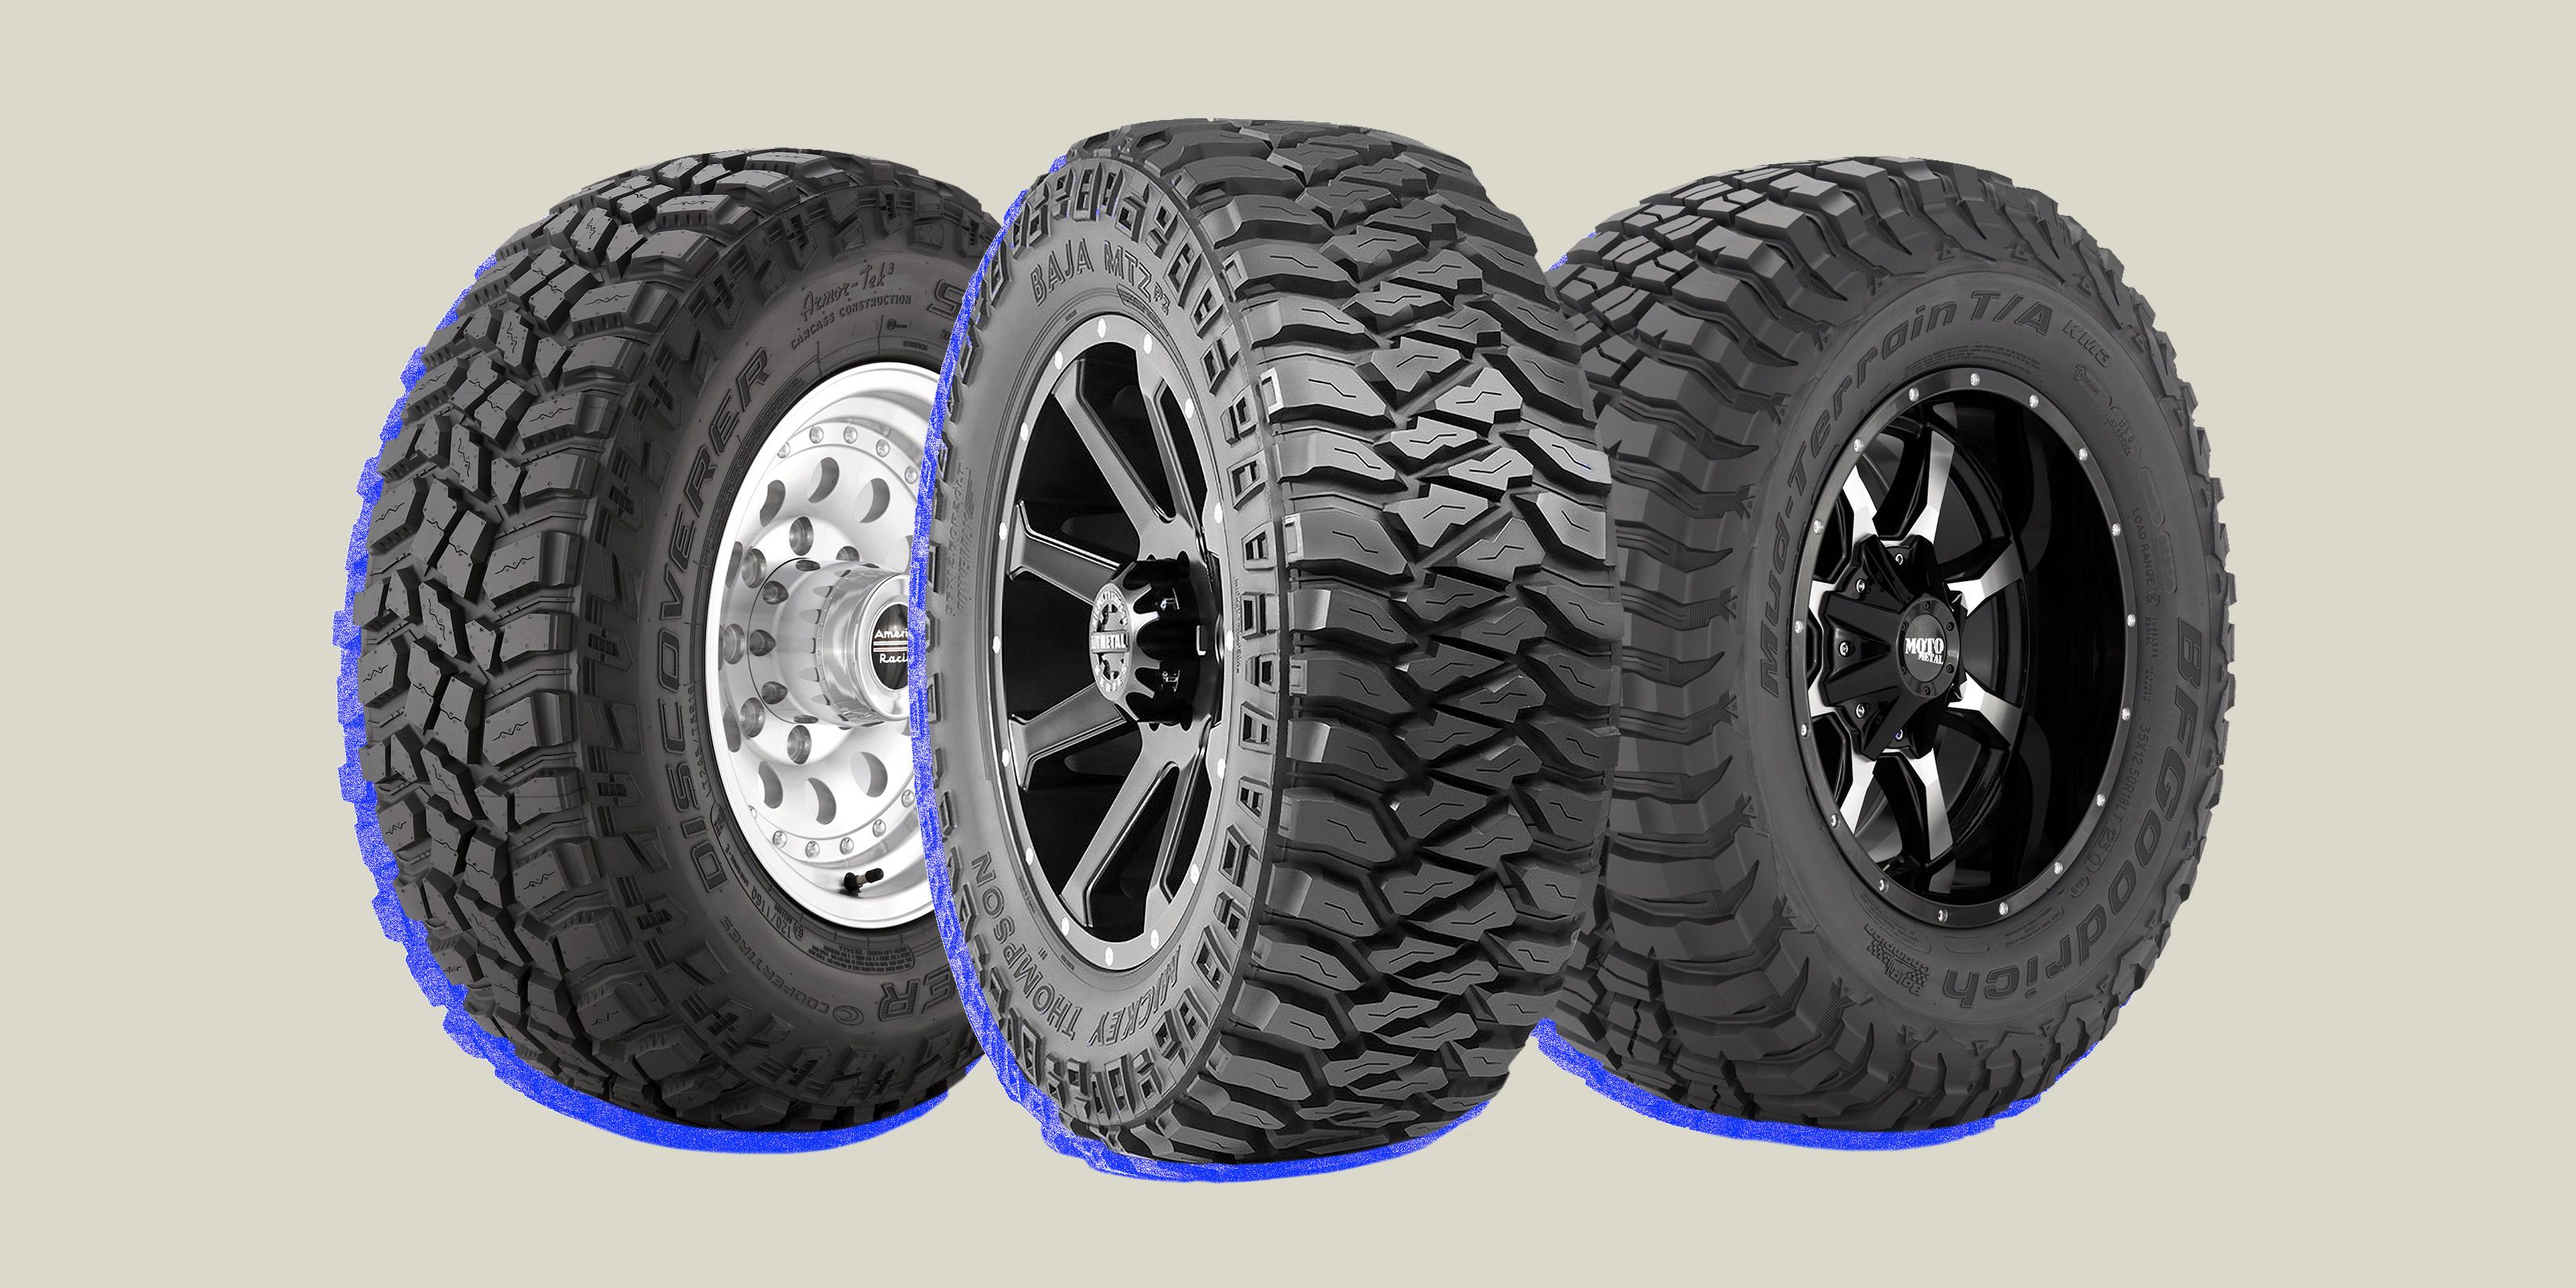 The Best Off-Road Adventure Tires: BF Goodrich, Goodyear and More